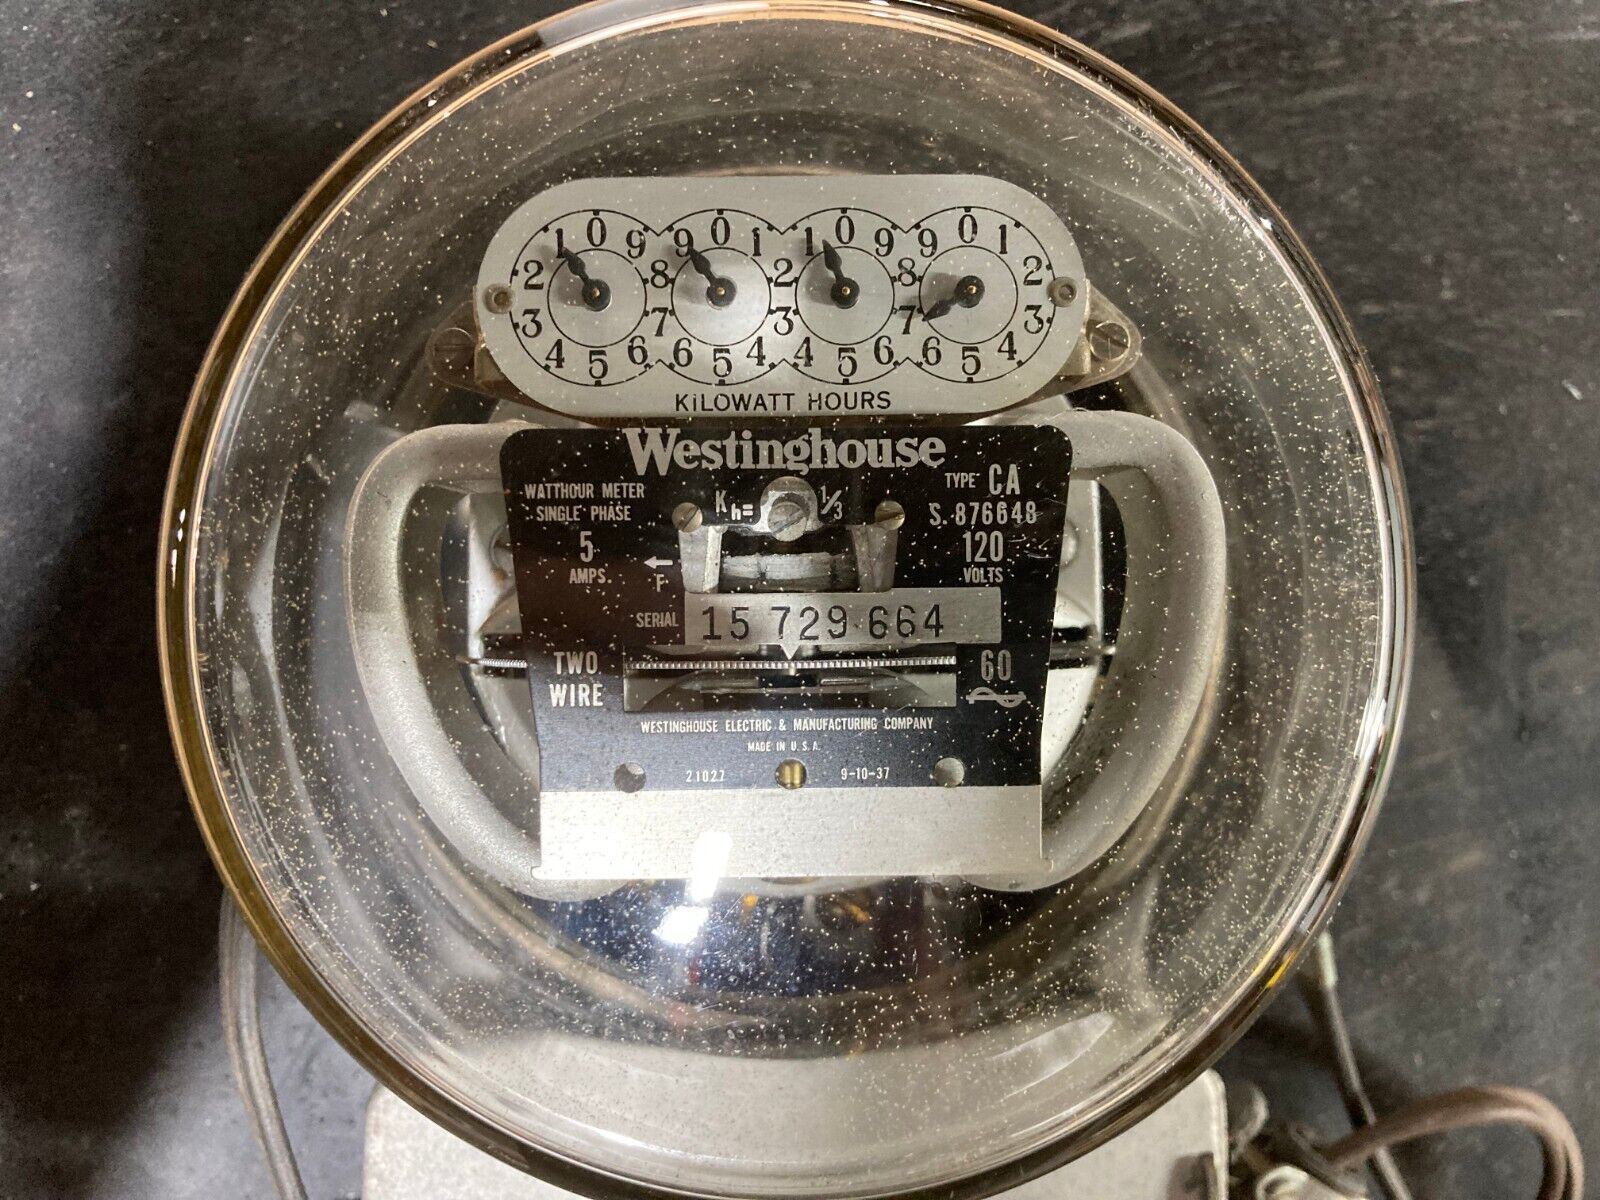 Vintage WESTINGHOUSE Electric Meter Watt Hour Single Phase Type CA Made In USA